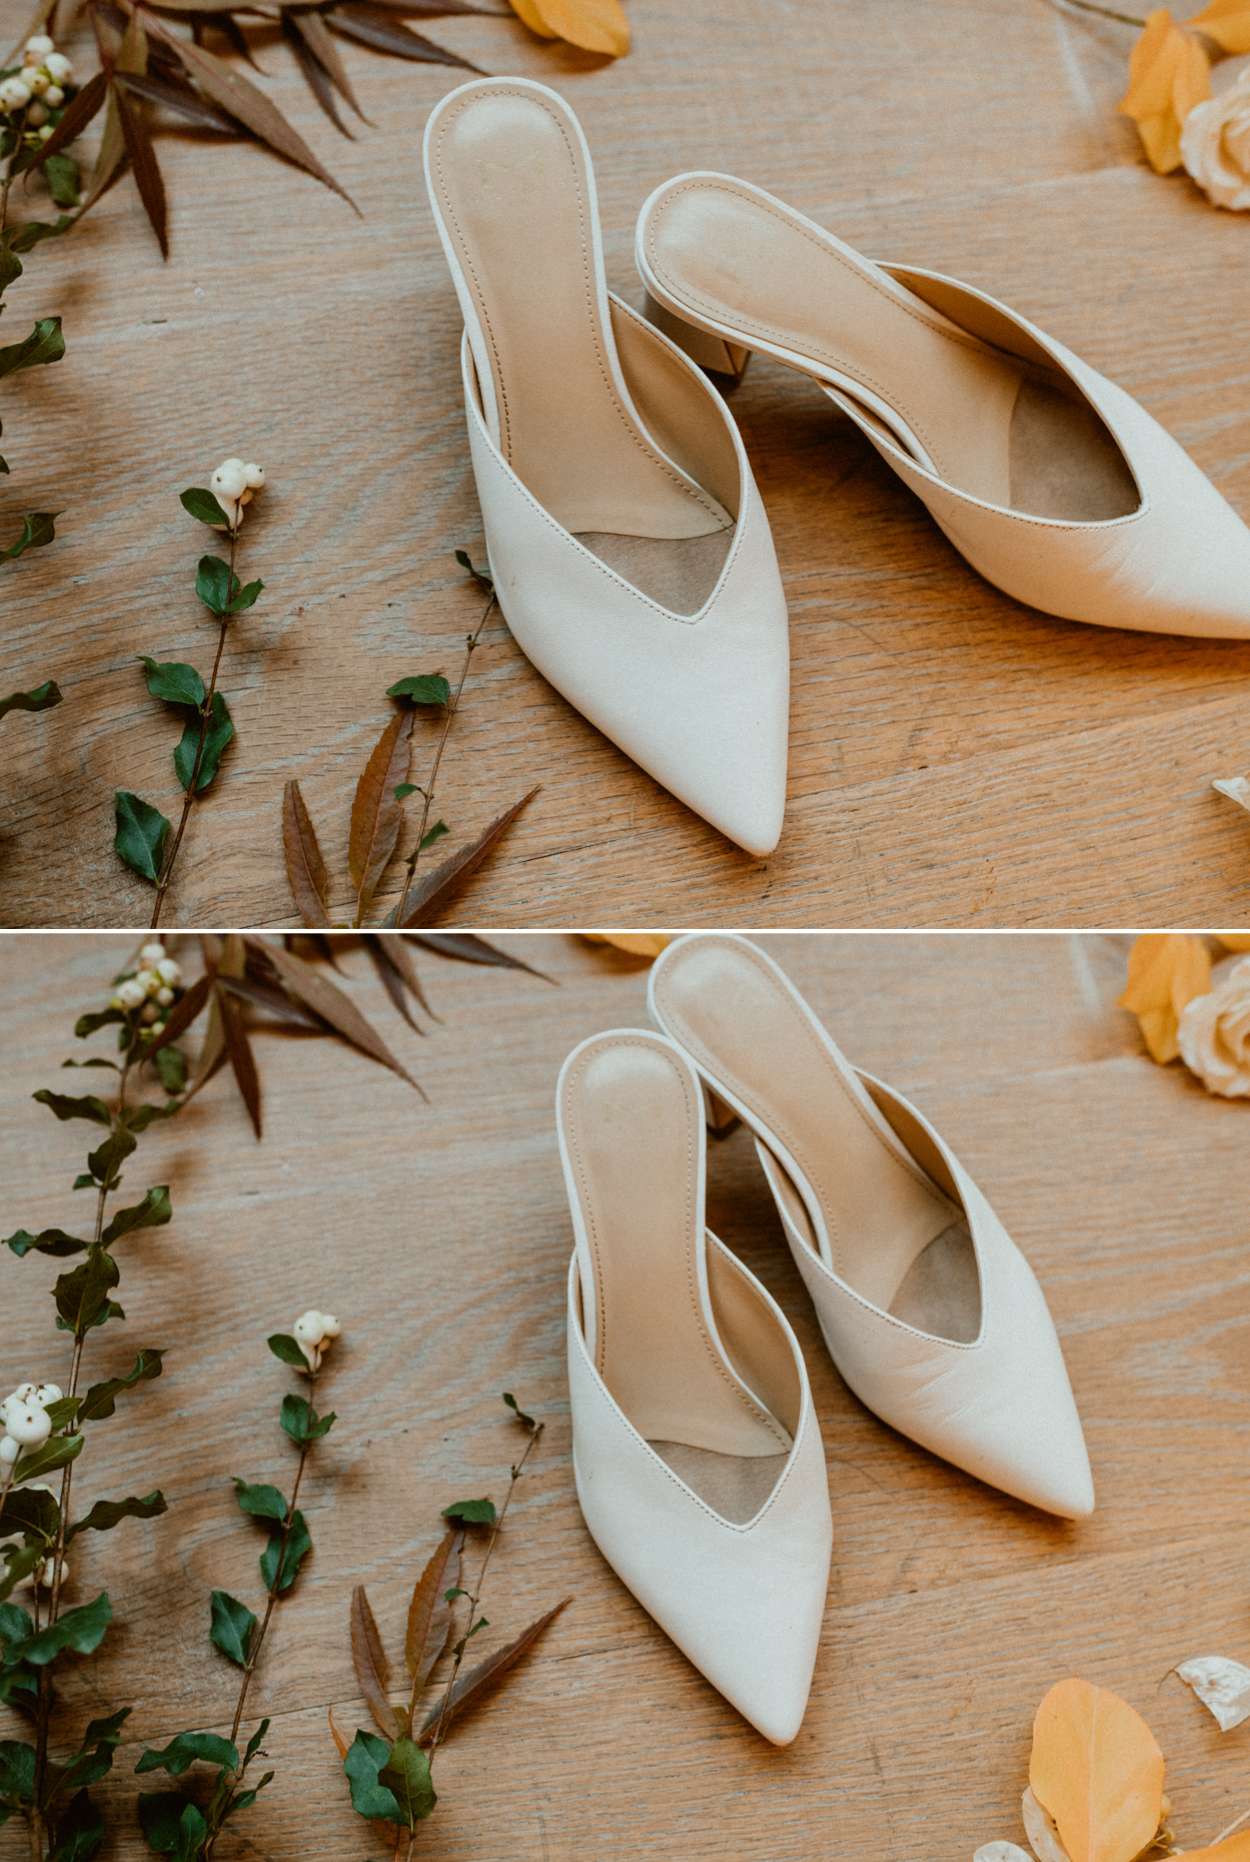 Bride Shoes Block 41 inspiration for wedding and elopement